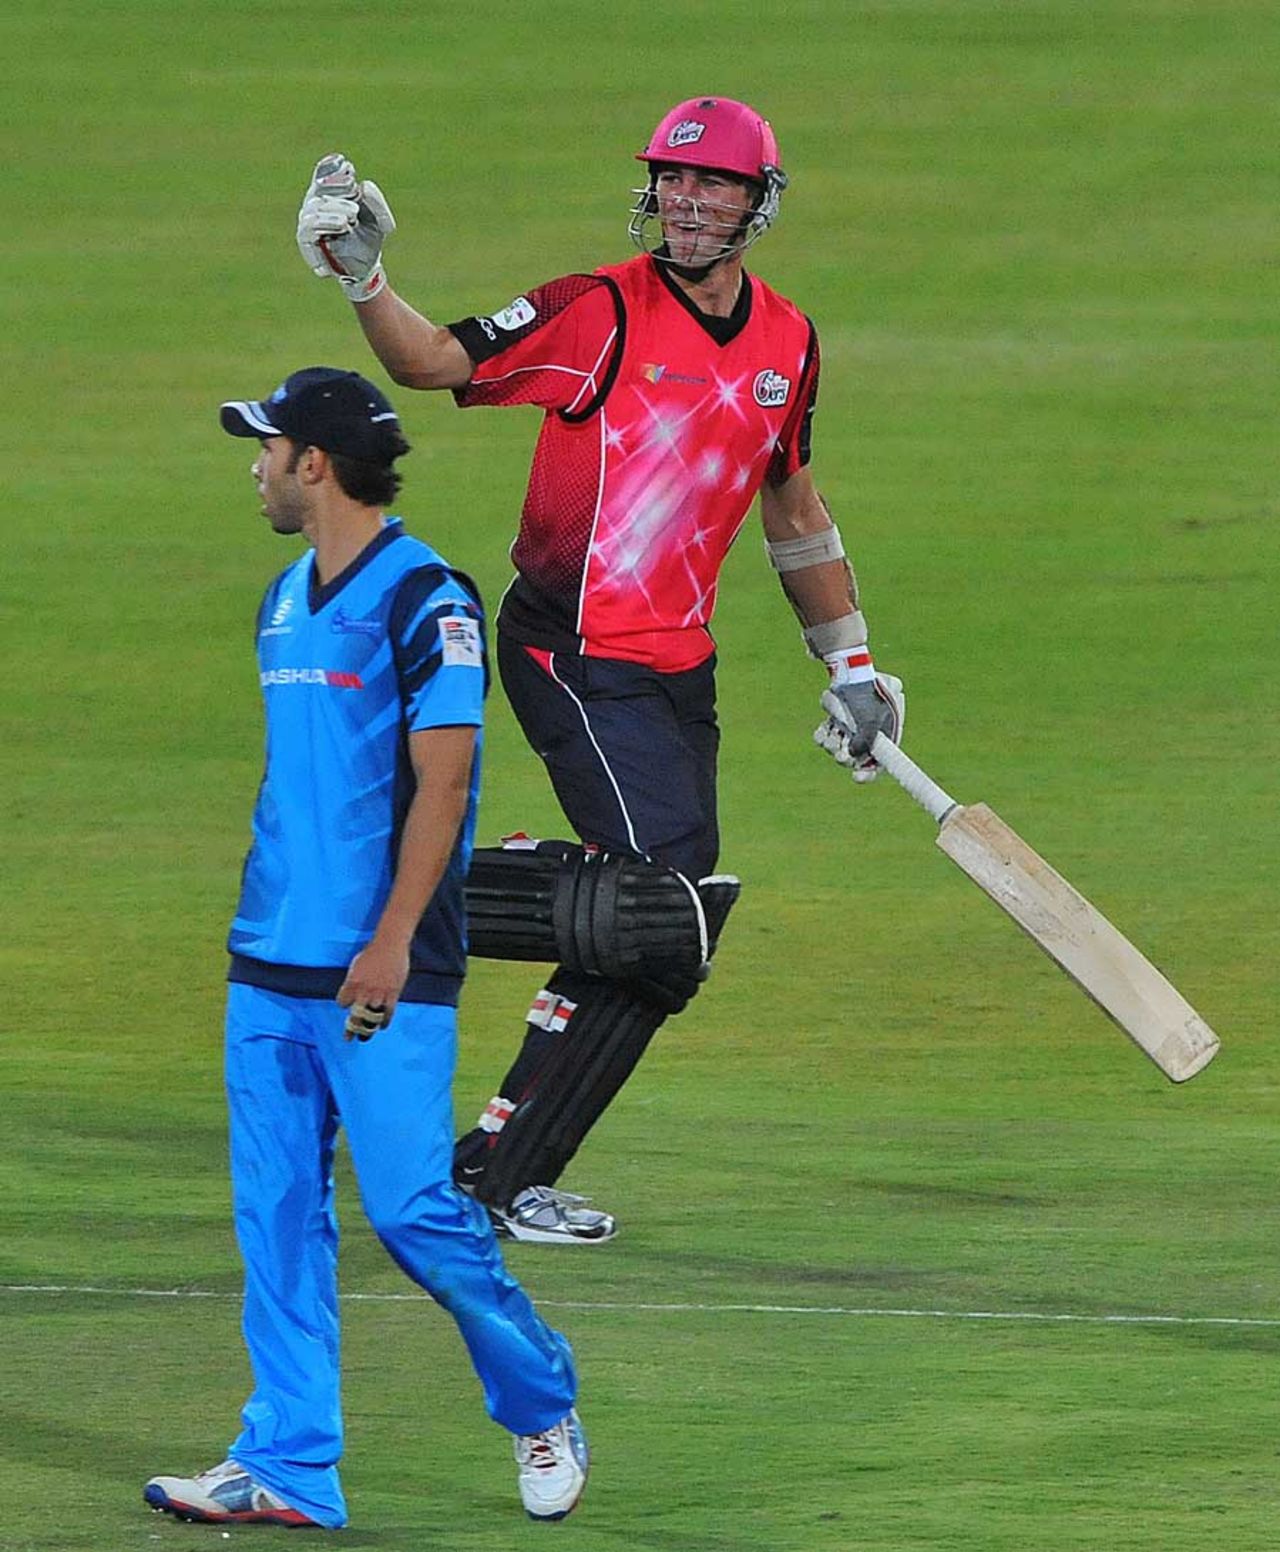 Pat Cummins helped take Sydney Sixers to victory, Titans v Sydney Sixers, 2nd semi-final, Champions League T20, Centurion, October 26, 2012